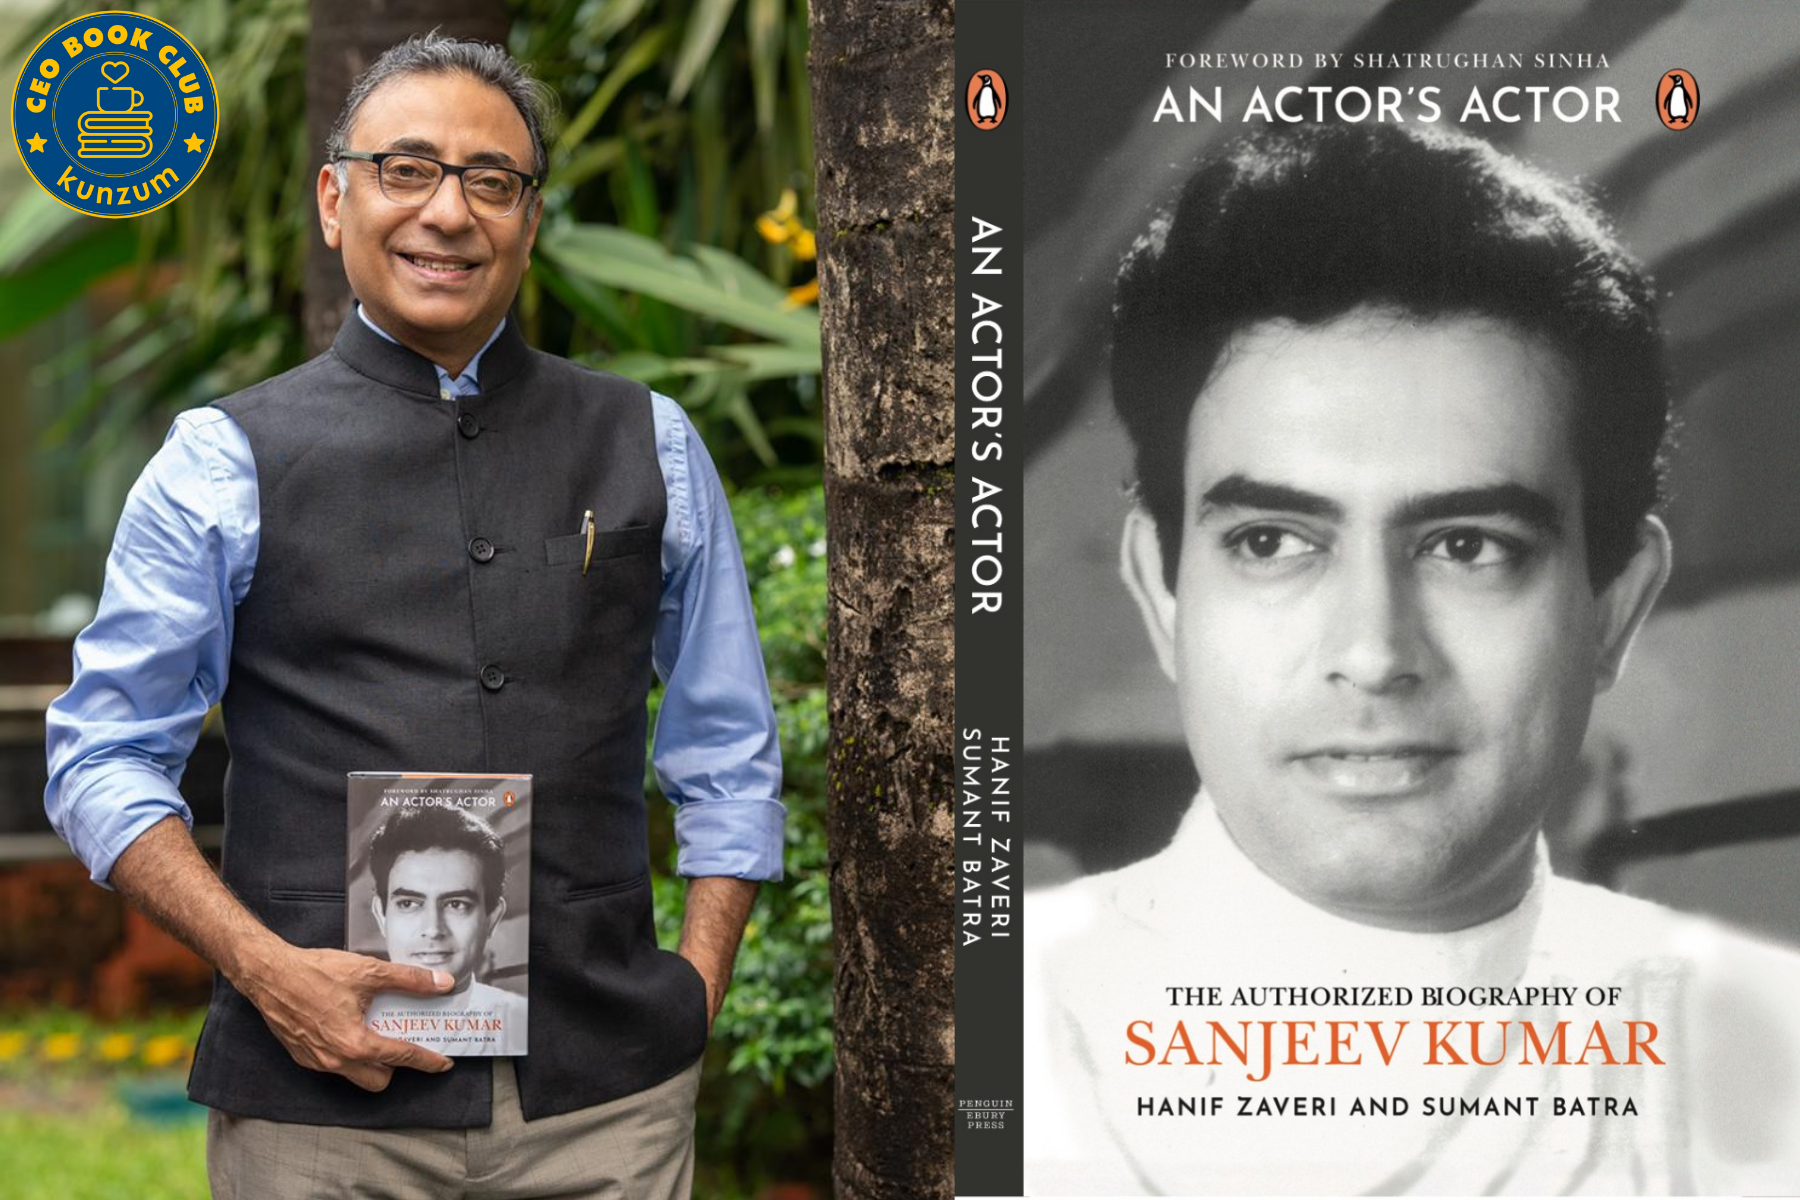 Let’s Talk About Sanjeev Kumar, Truly An Actor’s Actor – Gurgaon, May 29 | CEO Book Club